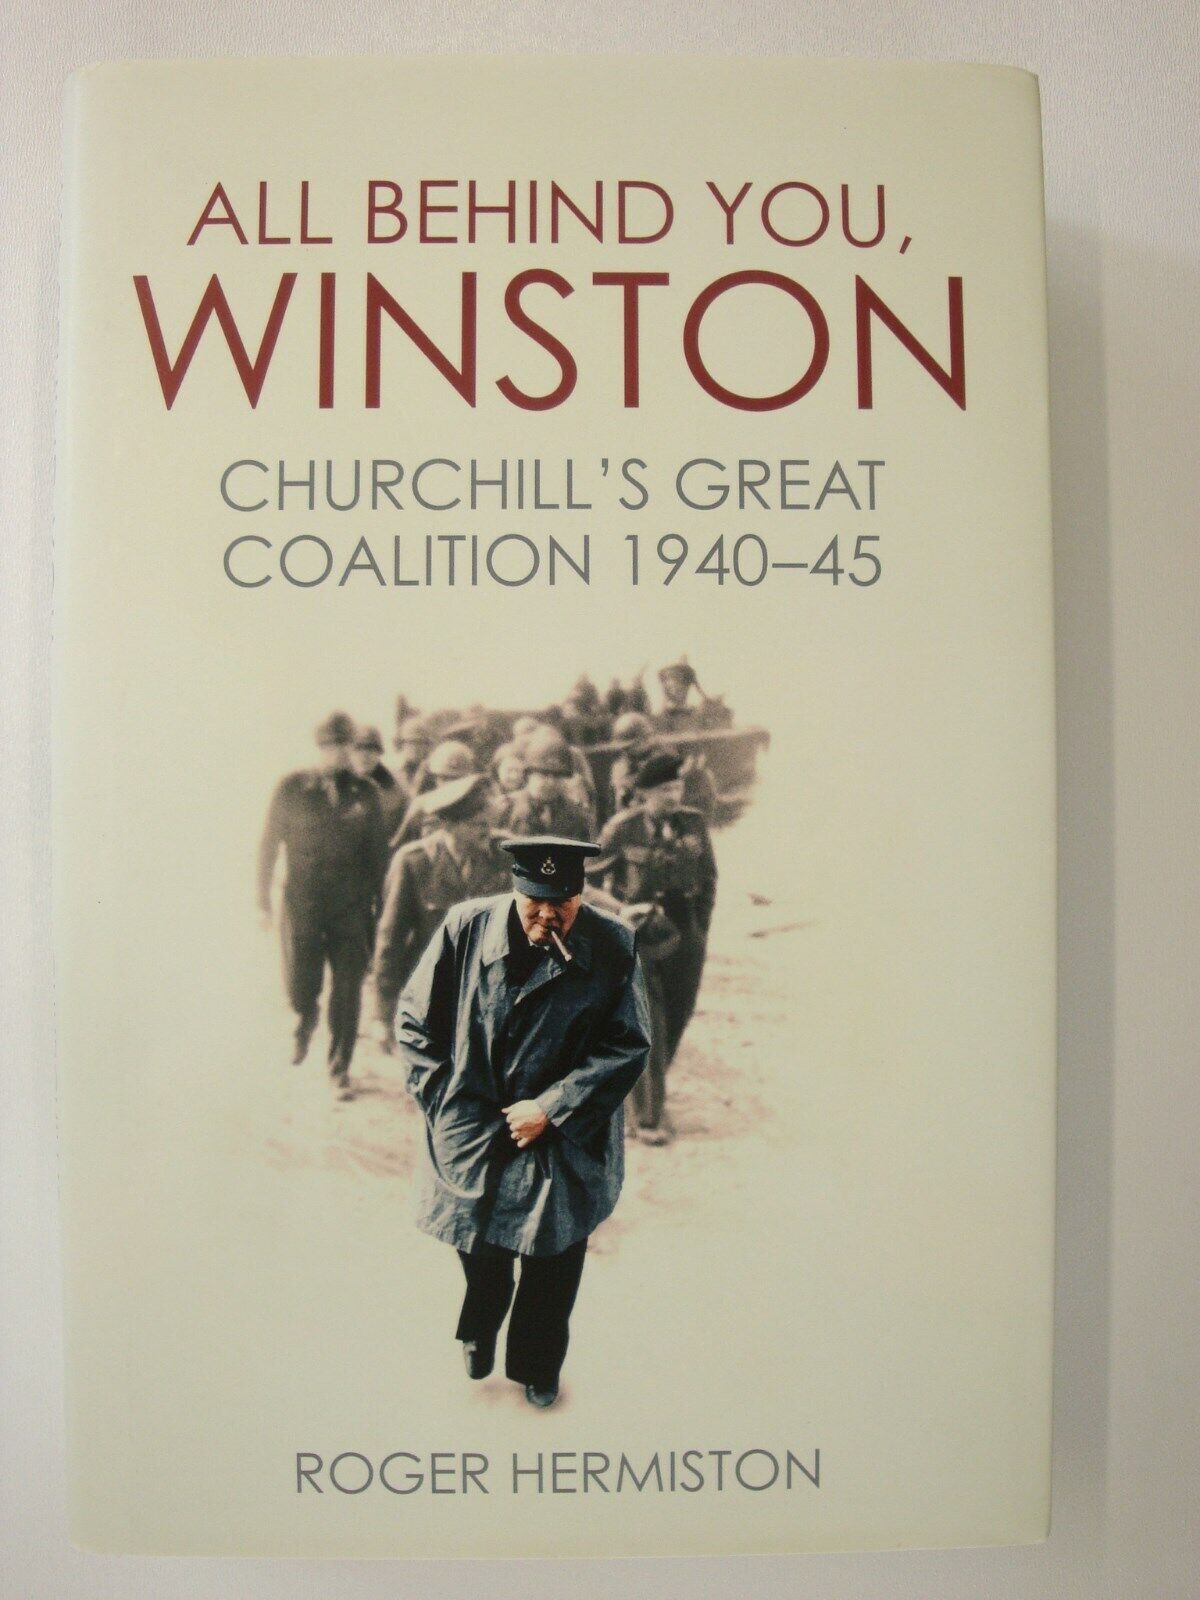 All Behind You Winston, Churchill's Great Coalition 1940-45 (Battle Of Britain)